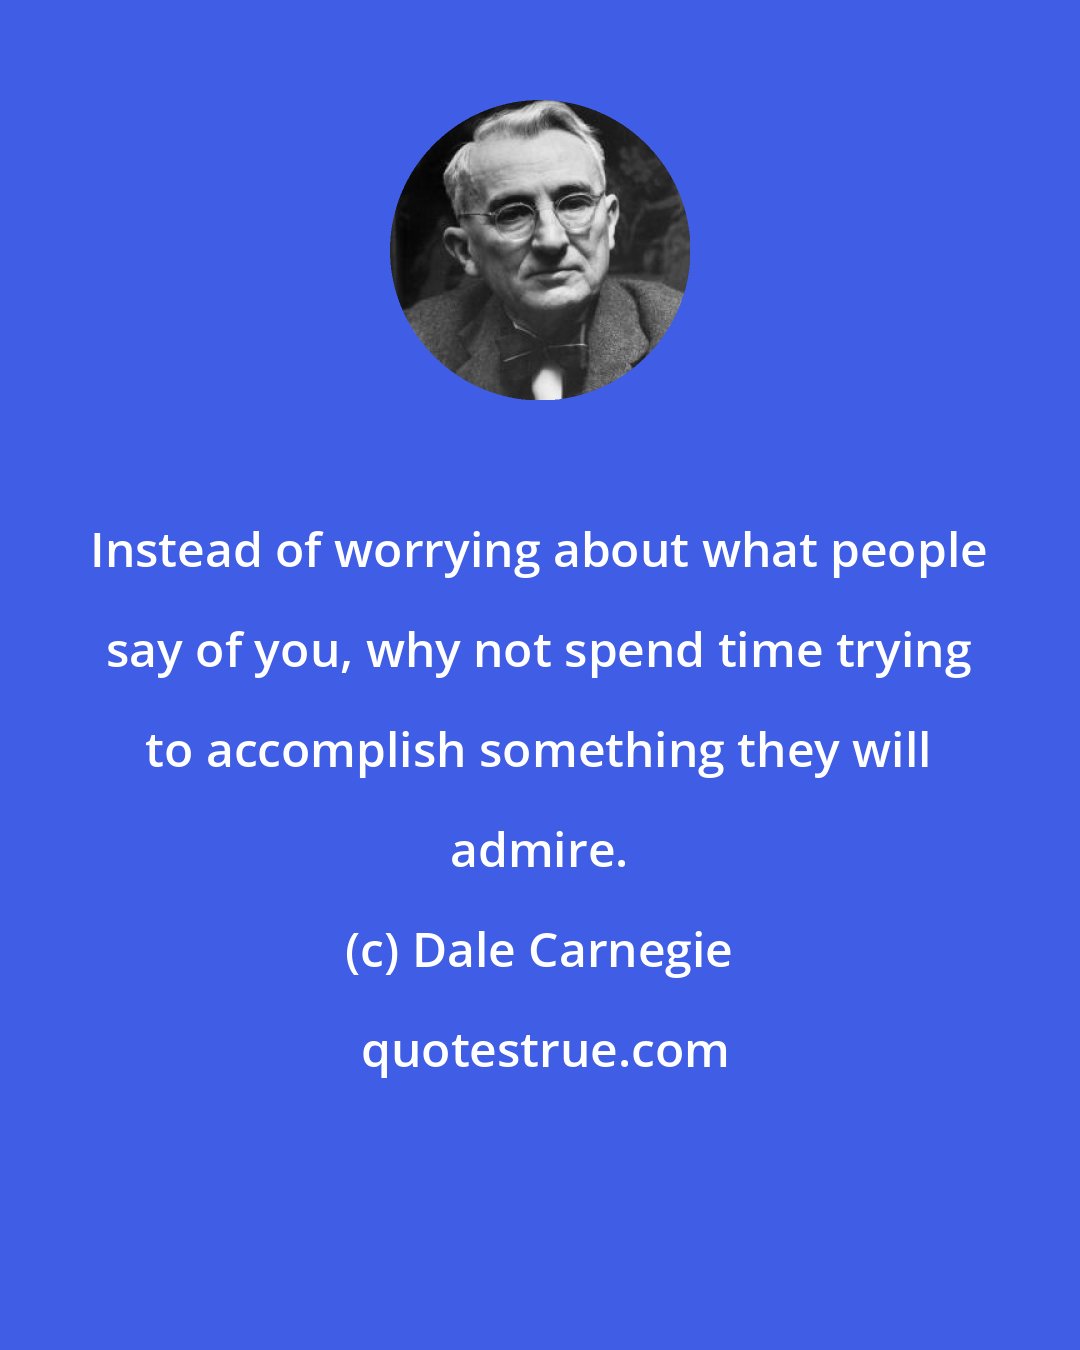 Dale Carnegie: Instead of worrying about what people say of you, why not spend time trying to accomplish something they will admire.